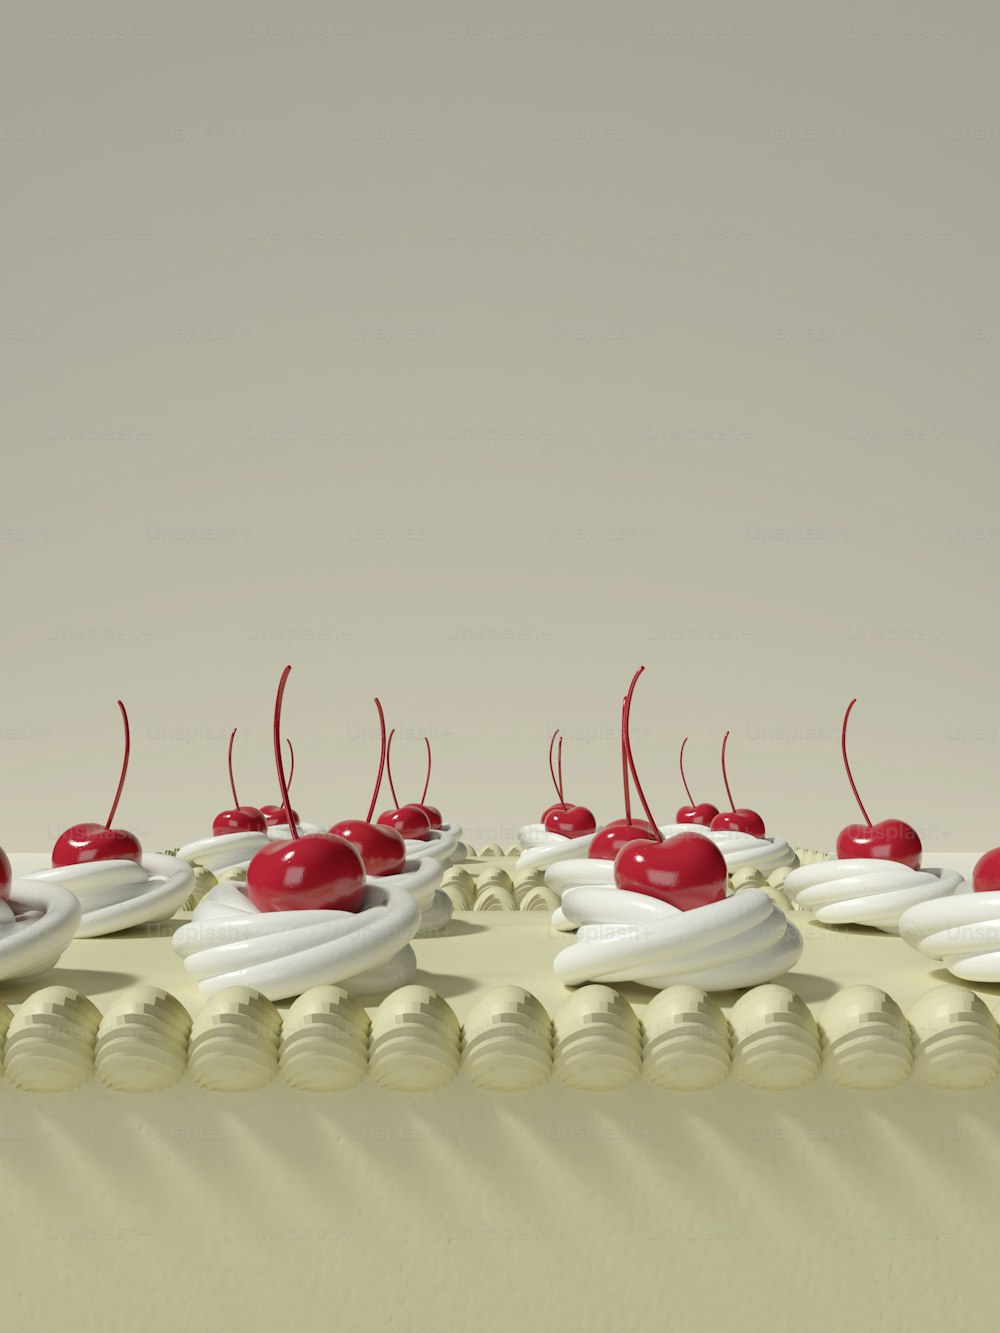 a group of cherries sitting on top of a cake